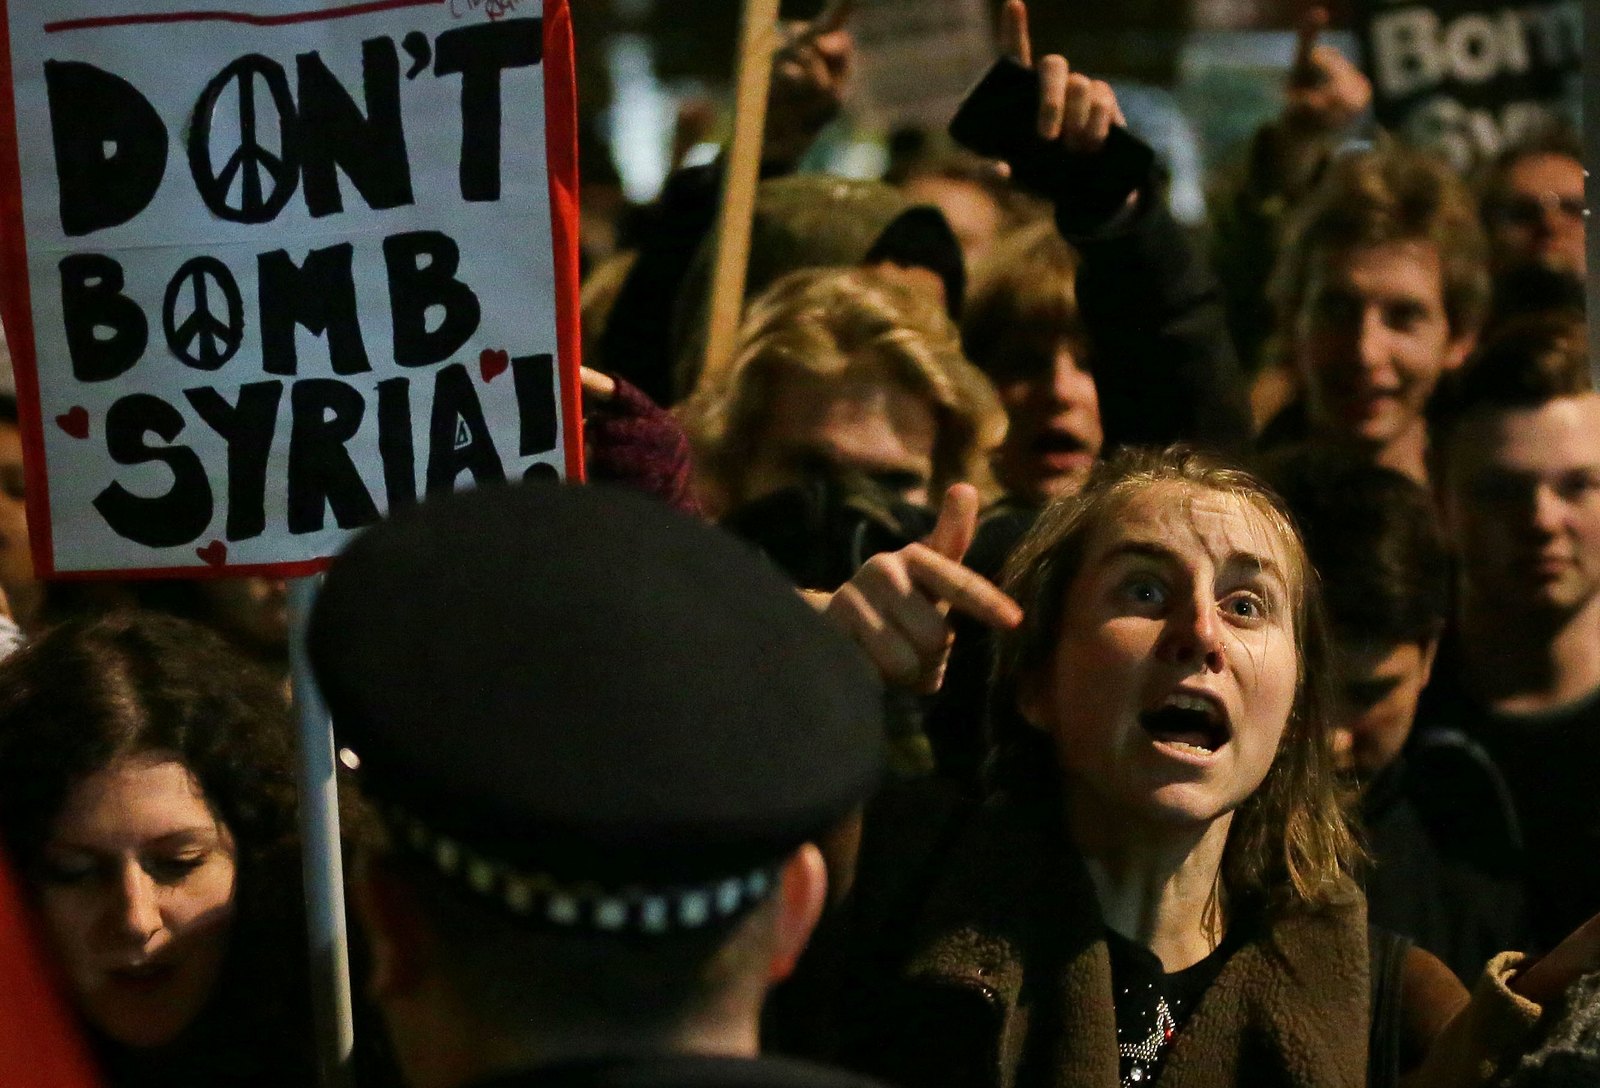 Protesters react outside the Houses of Parliament, in London, Wednesday, Dec. 2, 2015 after UK lawmakers voted 397-223 to launch airstrikes against in Syria. (AP Photo/Tim Ireland)